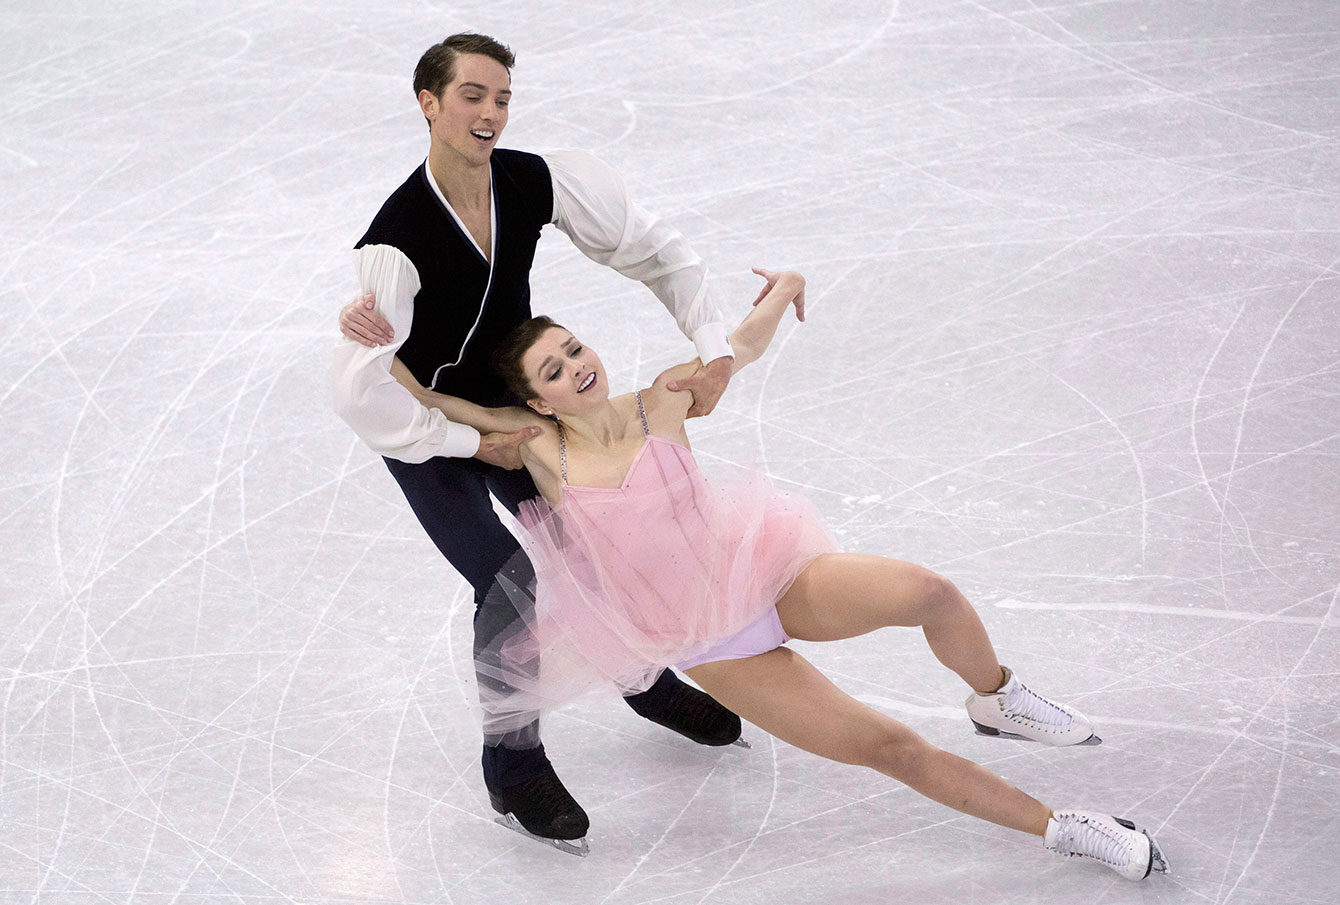 Alexandra Paul and Mitchell Islam in their short program on October 30, 2015 at Skate Canada International. 